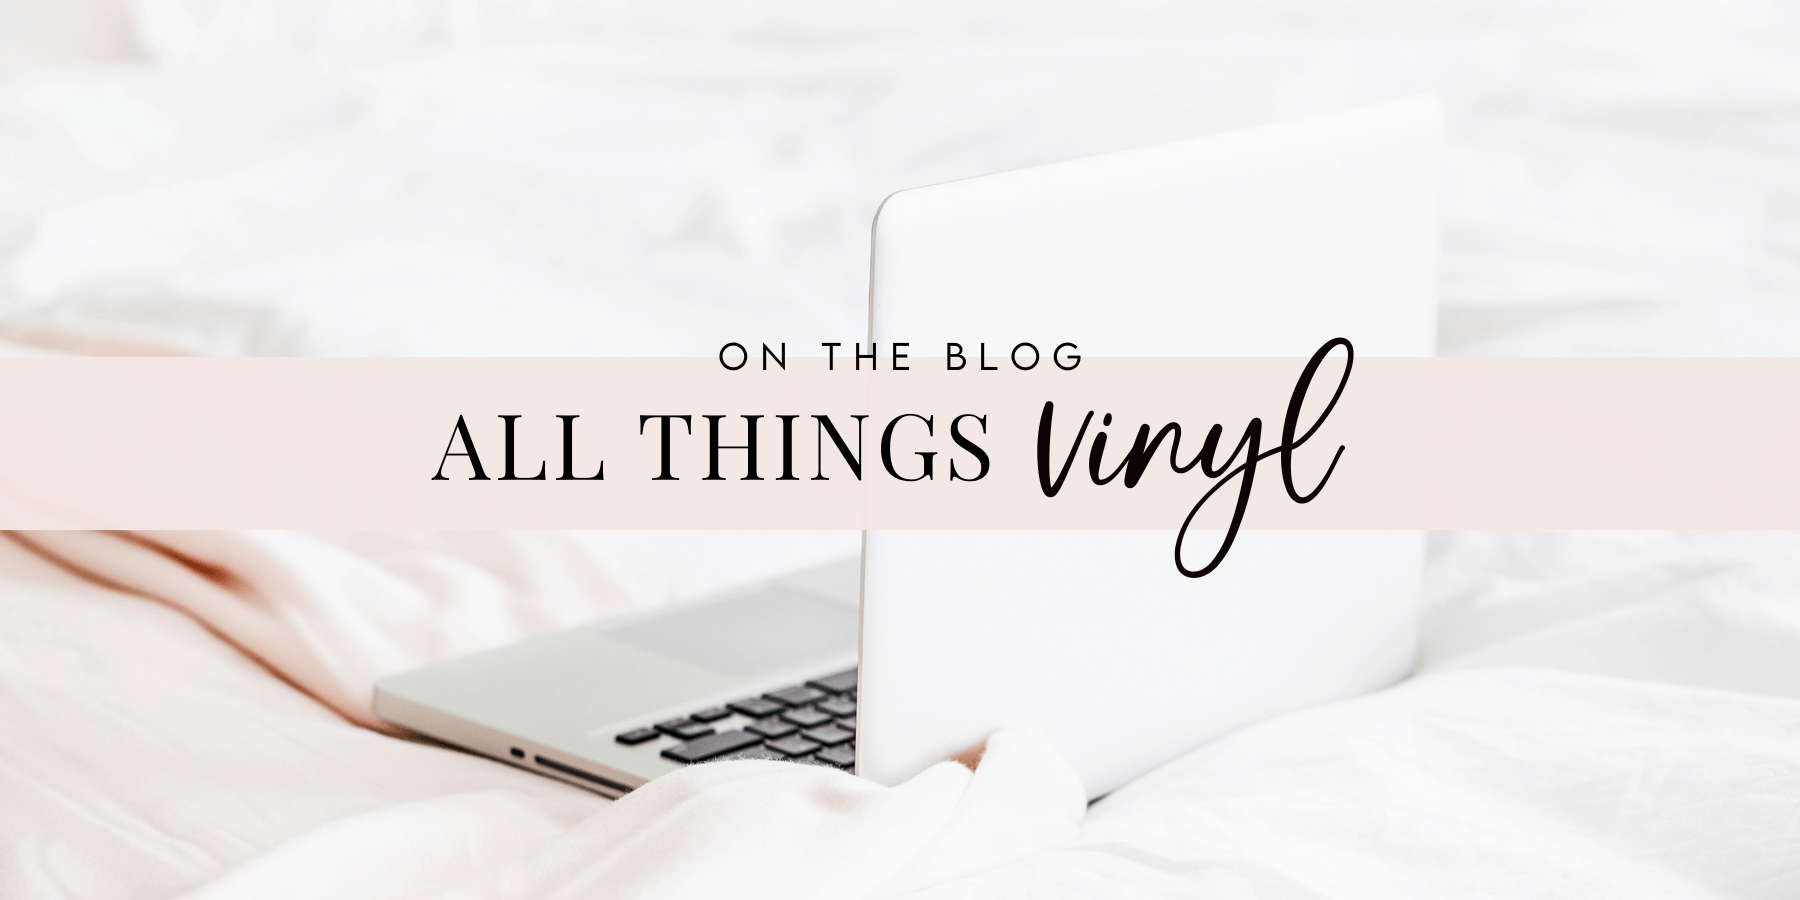 an open laptop sits on a bed with white linens. The text reads "on the blog: all things vinyl"